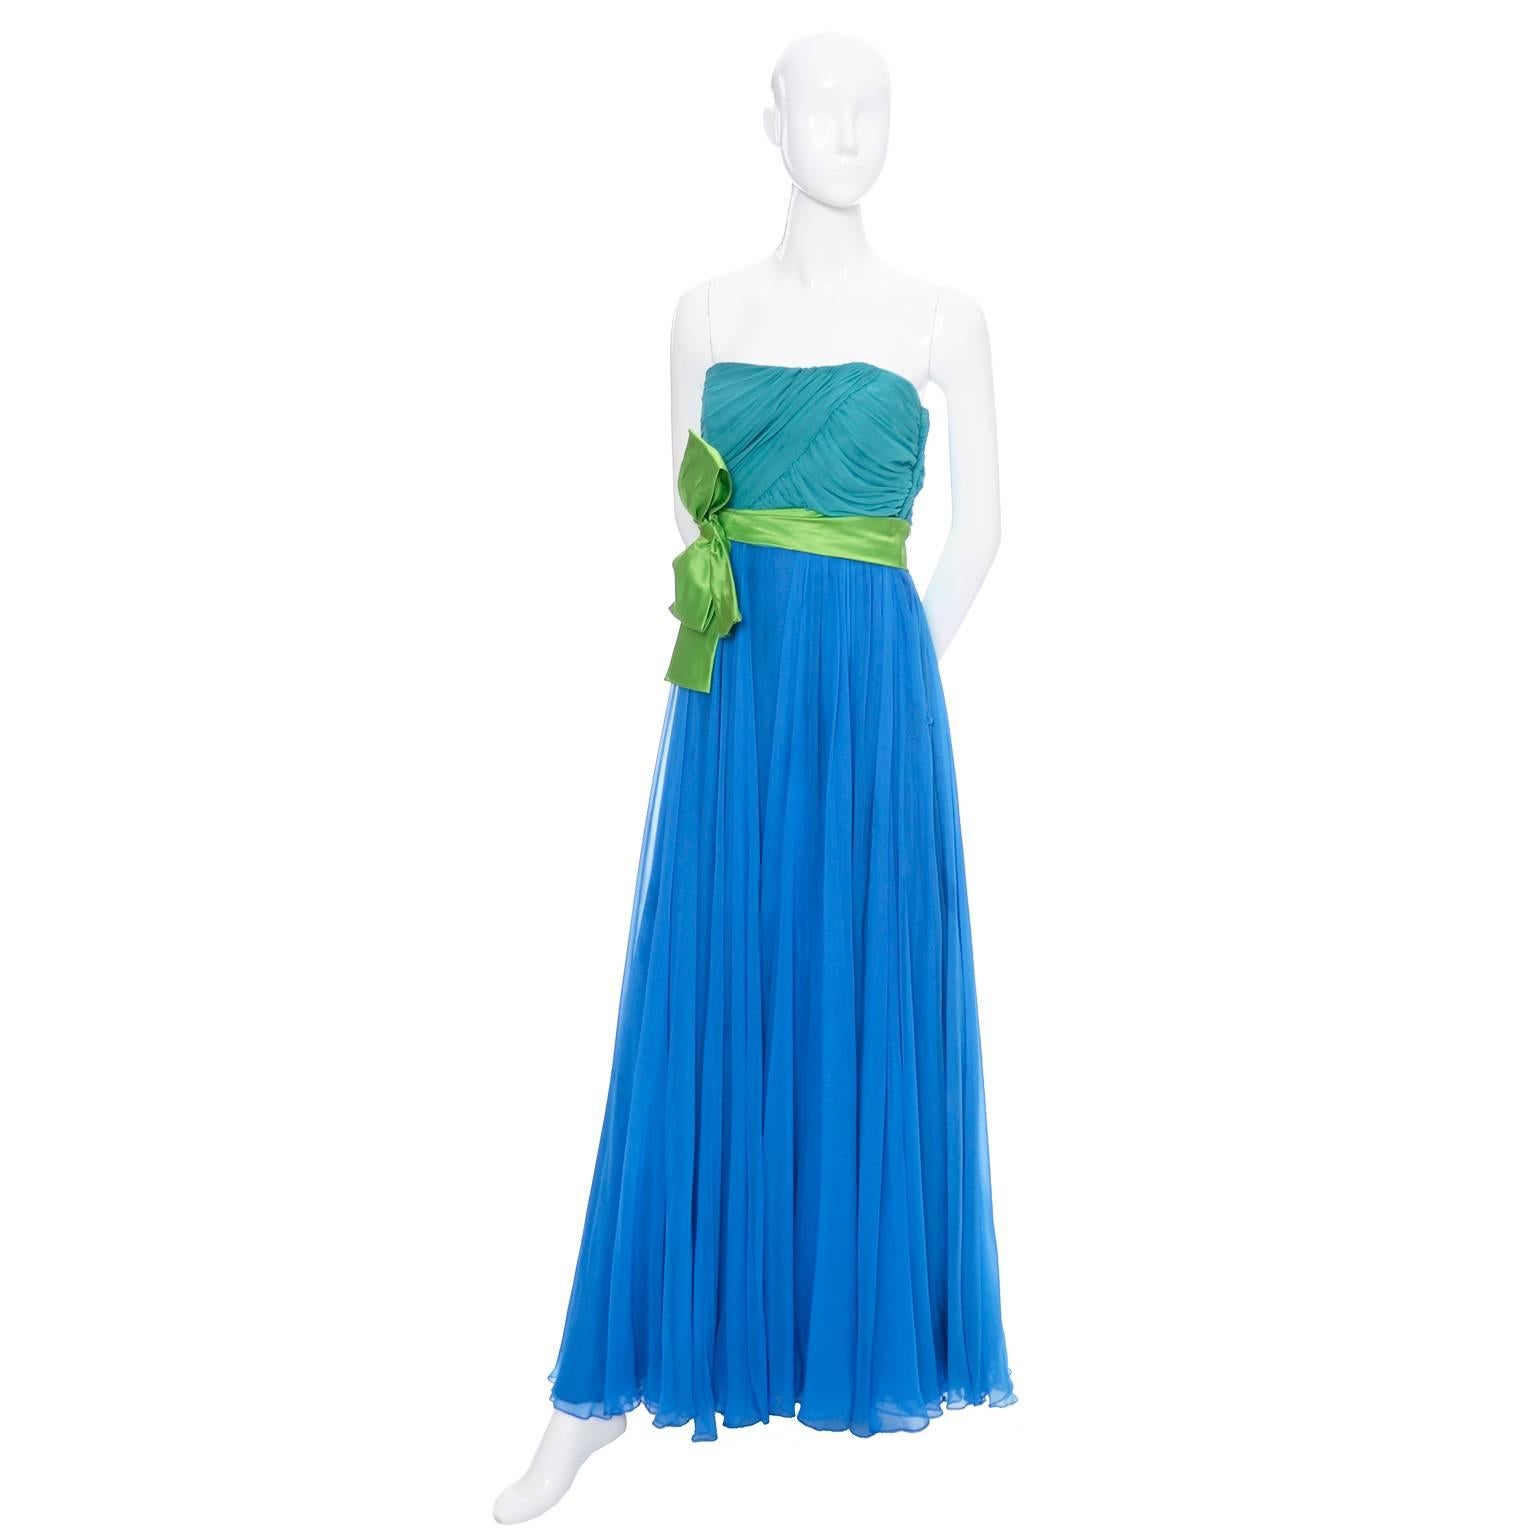 It's almost impossible to find silk chiffon like this anymore!  This is a beautiful vintage 1960's strapless silk chiffon formal dress. This dress has an aqua silk ruched bodice and very full royal blue silk chiffon skirt. The lime green satin sash